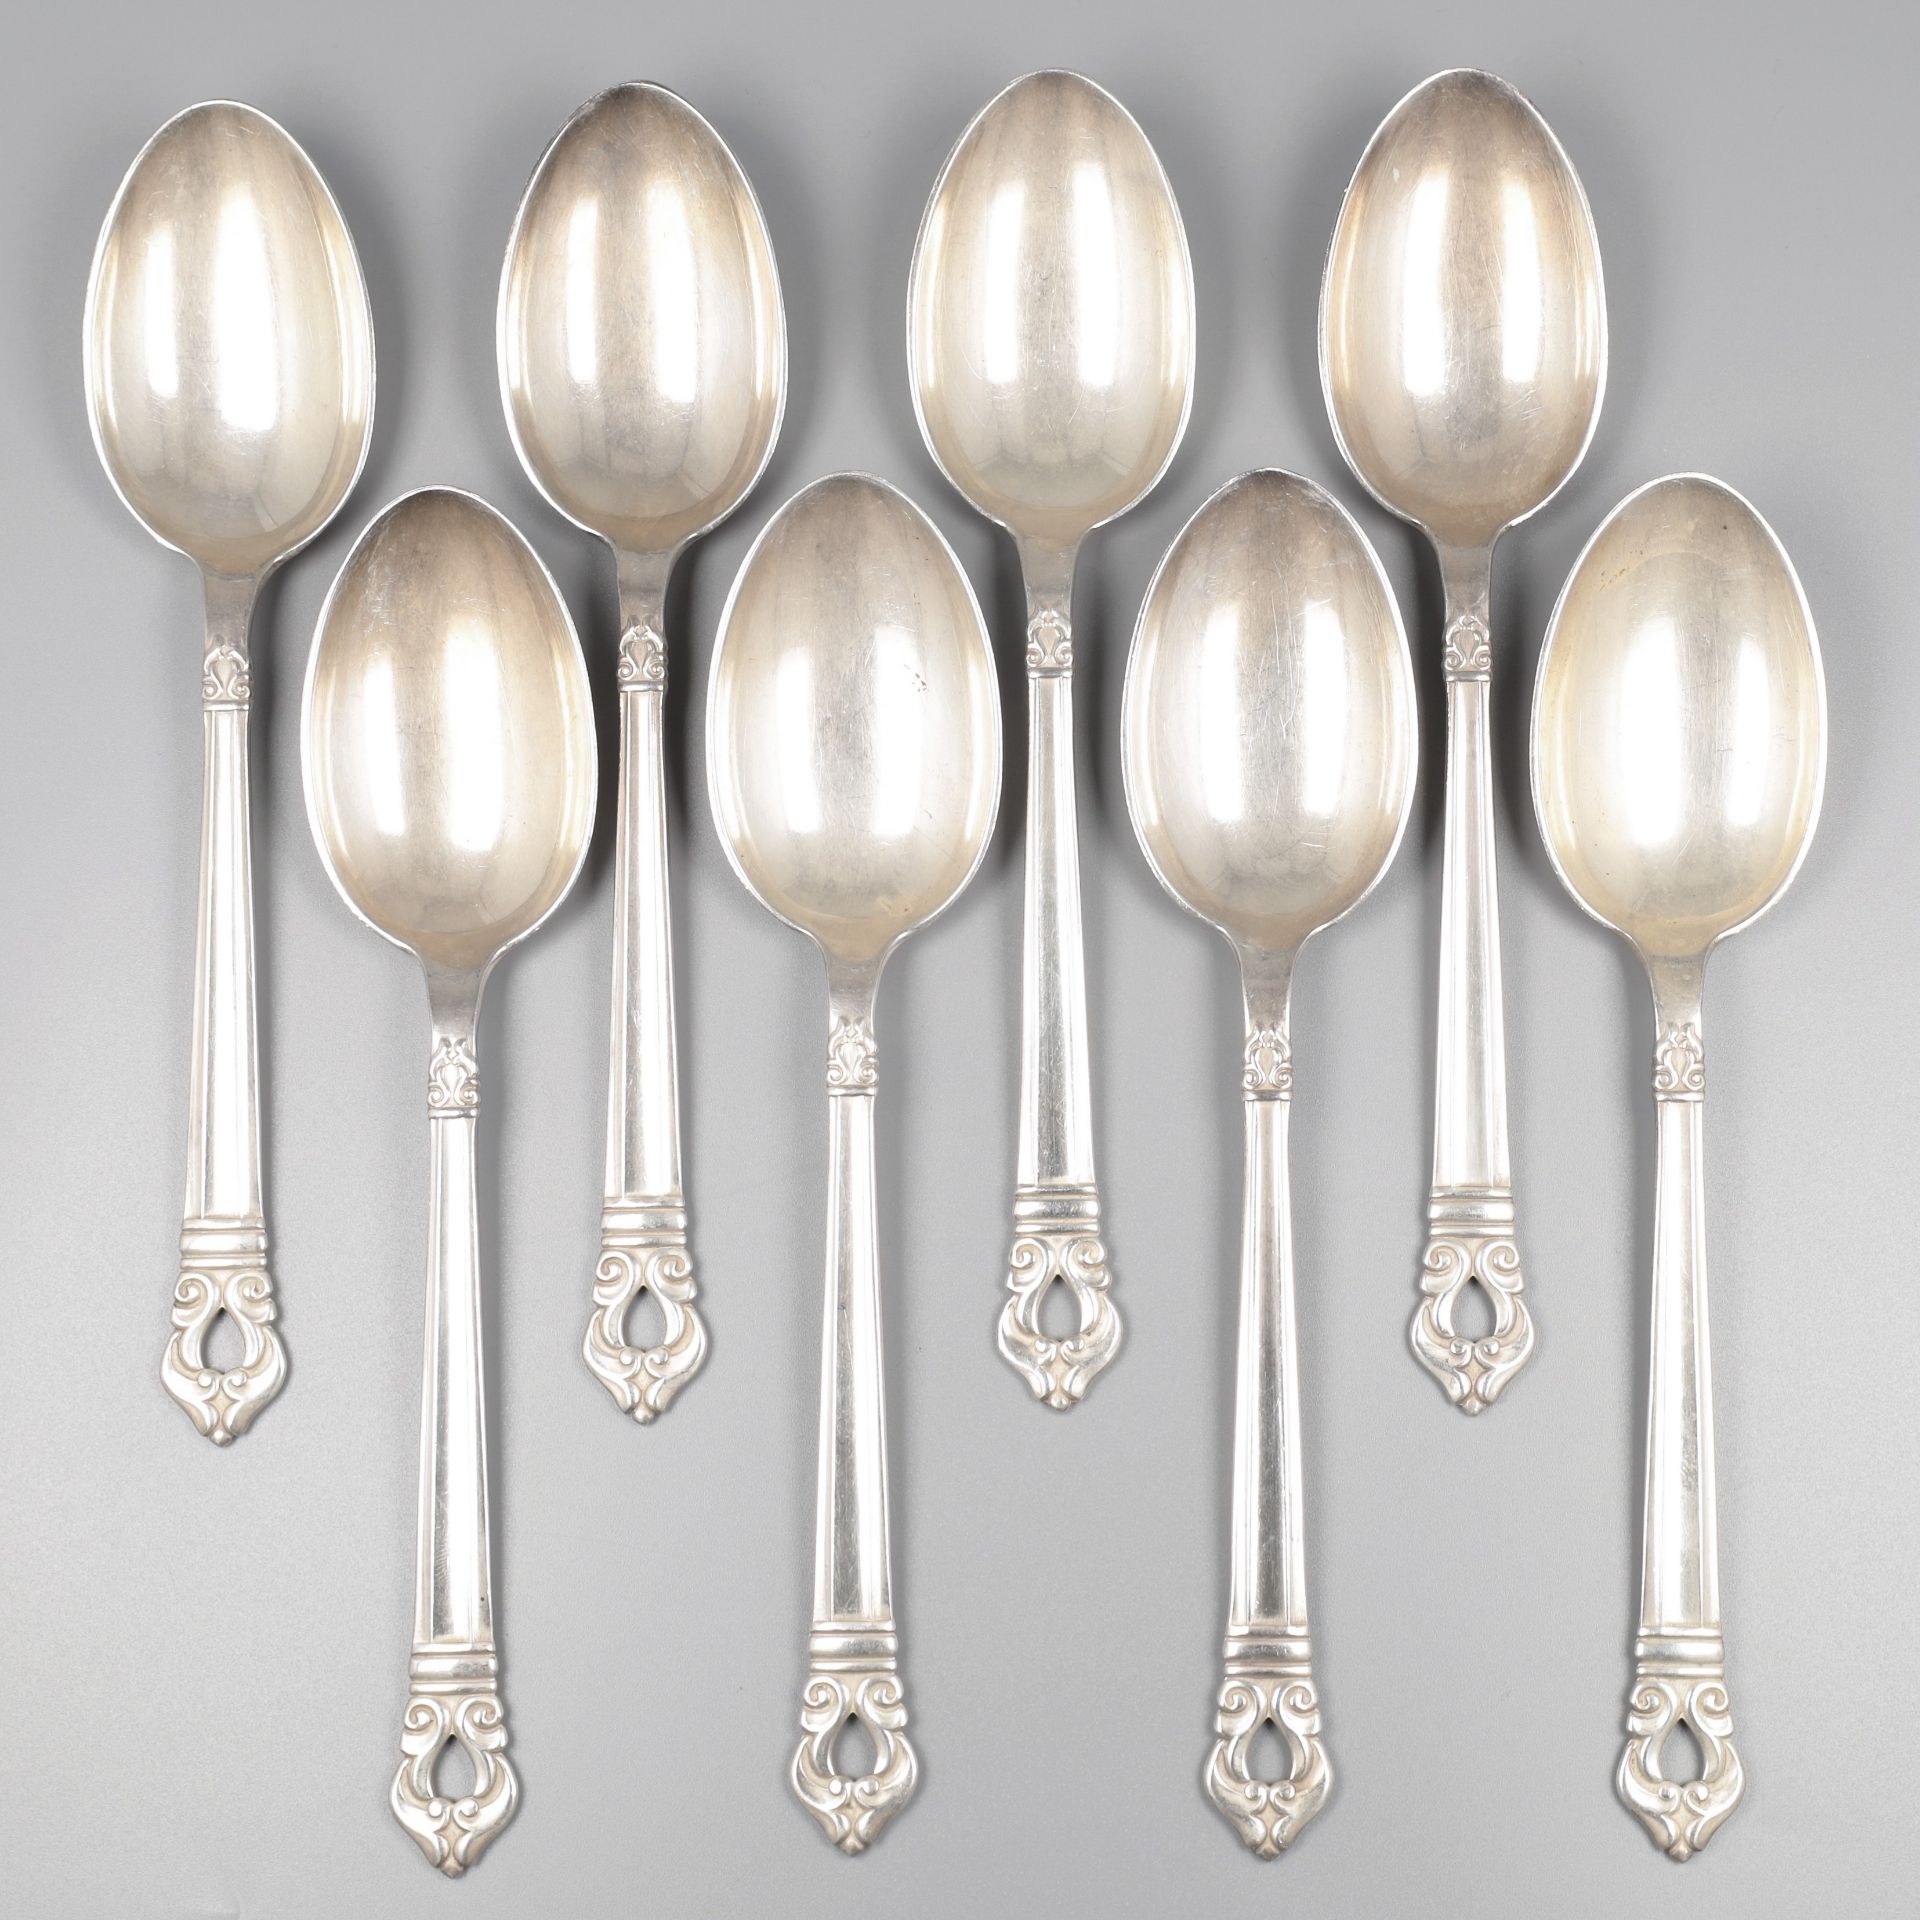 8-piece set of dinner spoons, model Royal Danish at Codan S.A. (Mexico), silver.
